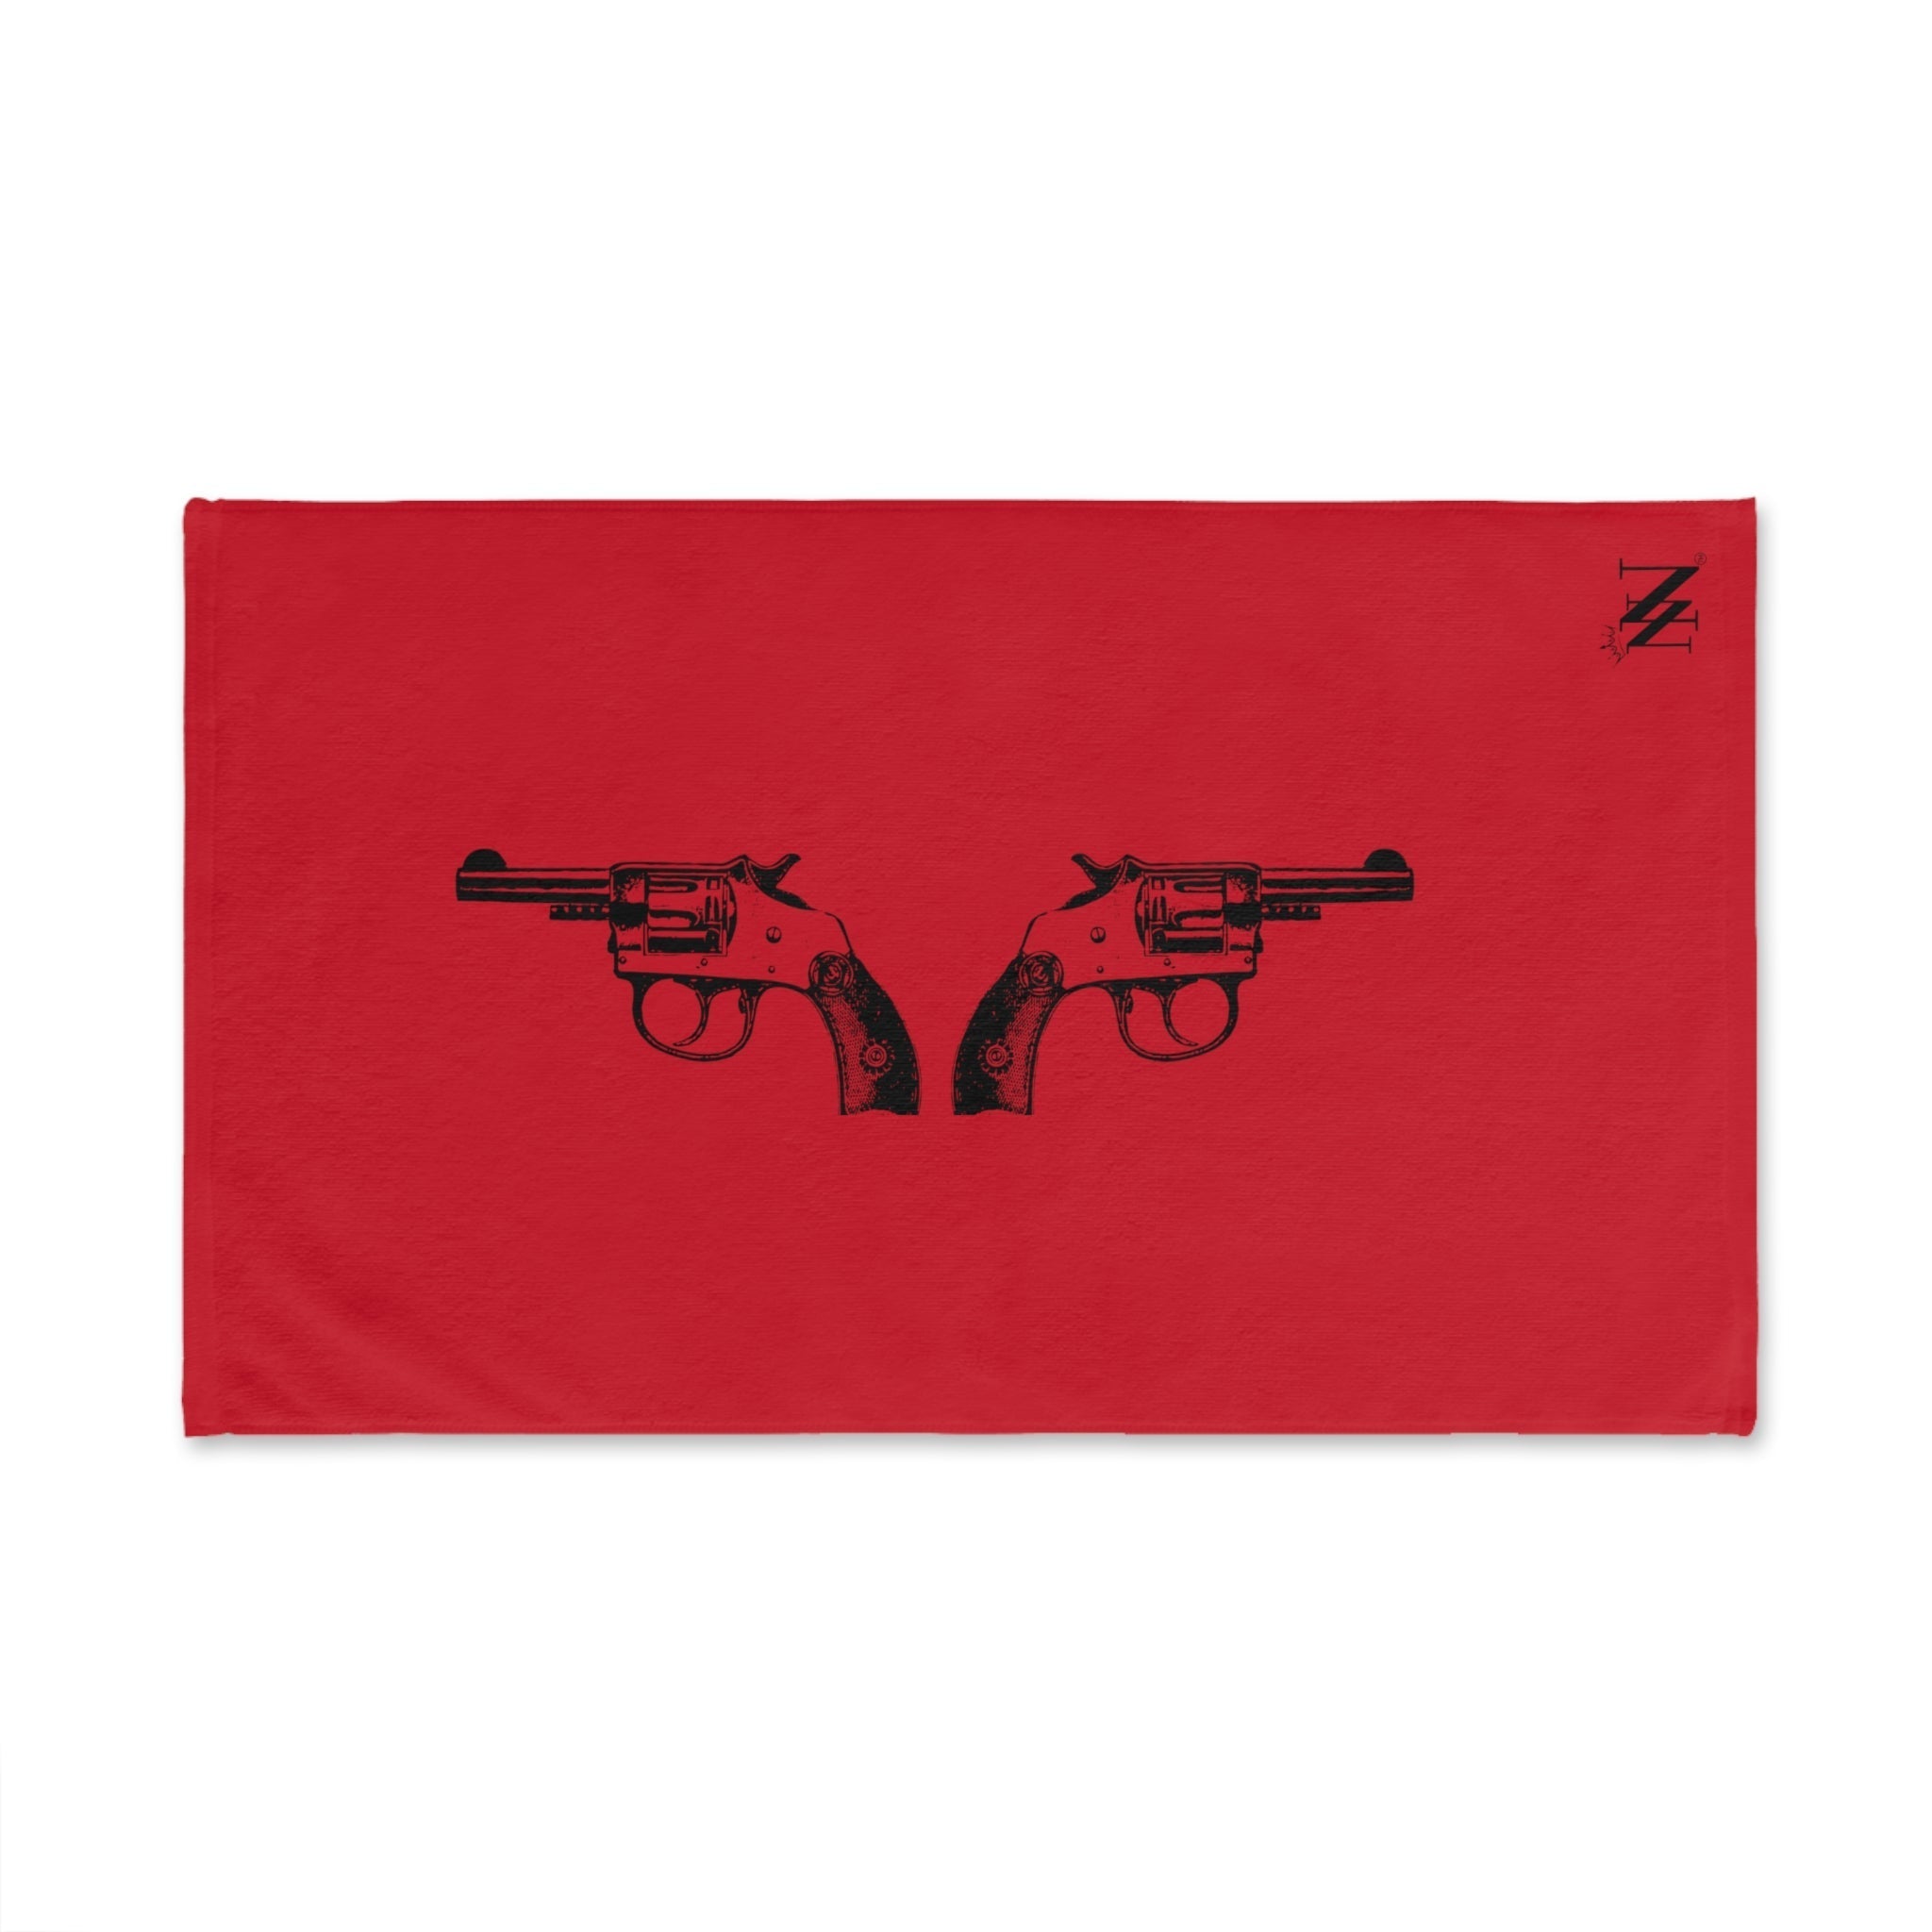 Black Revolver Gun Show Red | Sexy Gifts for Boyfriend, Funny Towel Romantic Gift for Wedding Couple Fiance First Year 2nd Anniversary Valentines, Party Gag Gifts, Joke Humor Cloth for Husband Men BF NECTAR NAPKINS